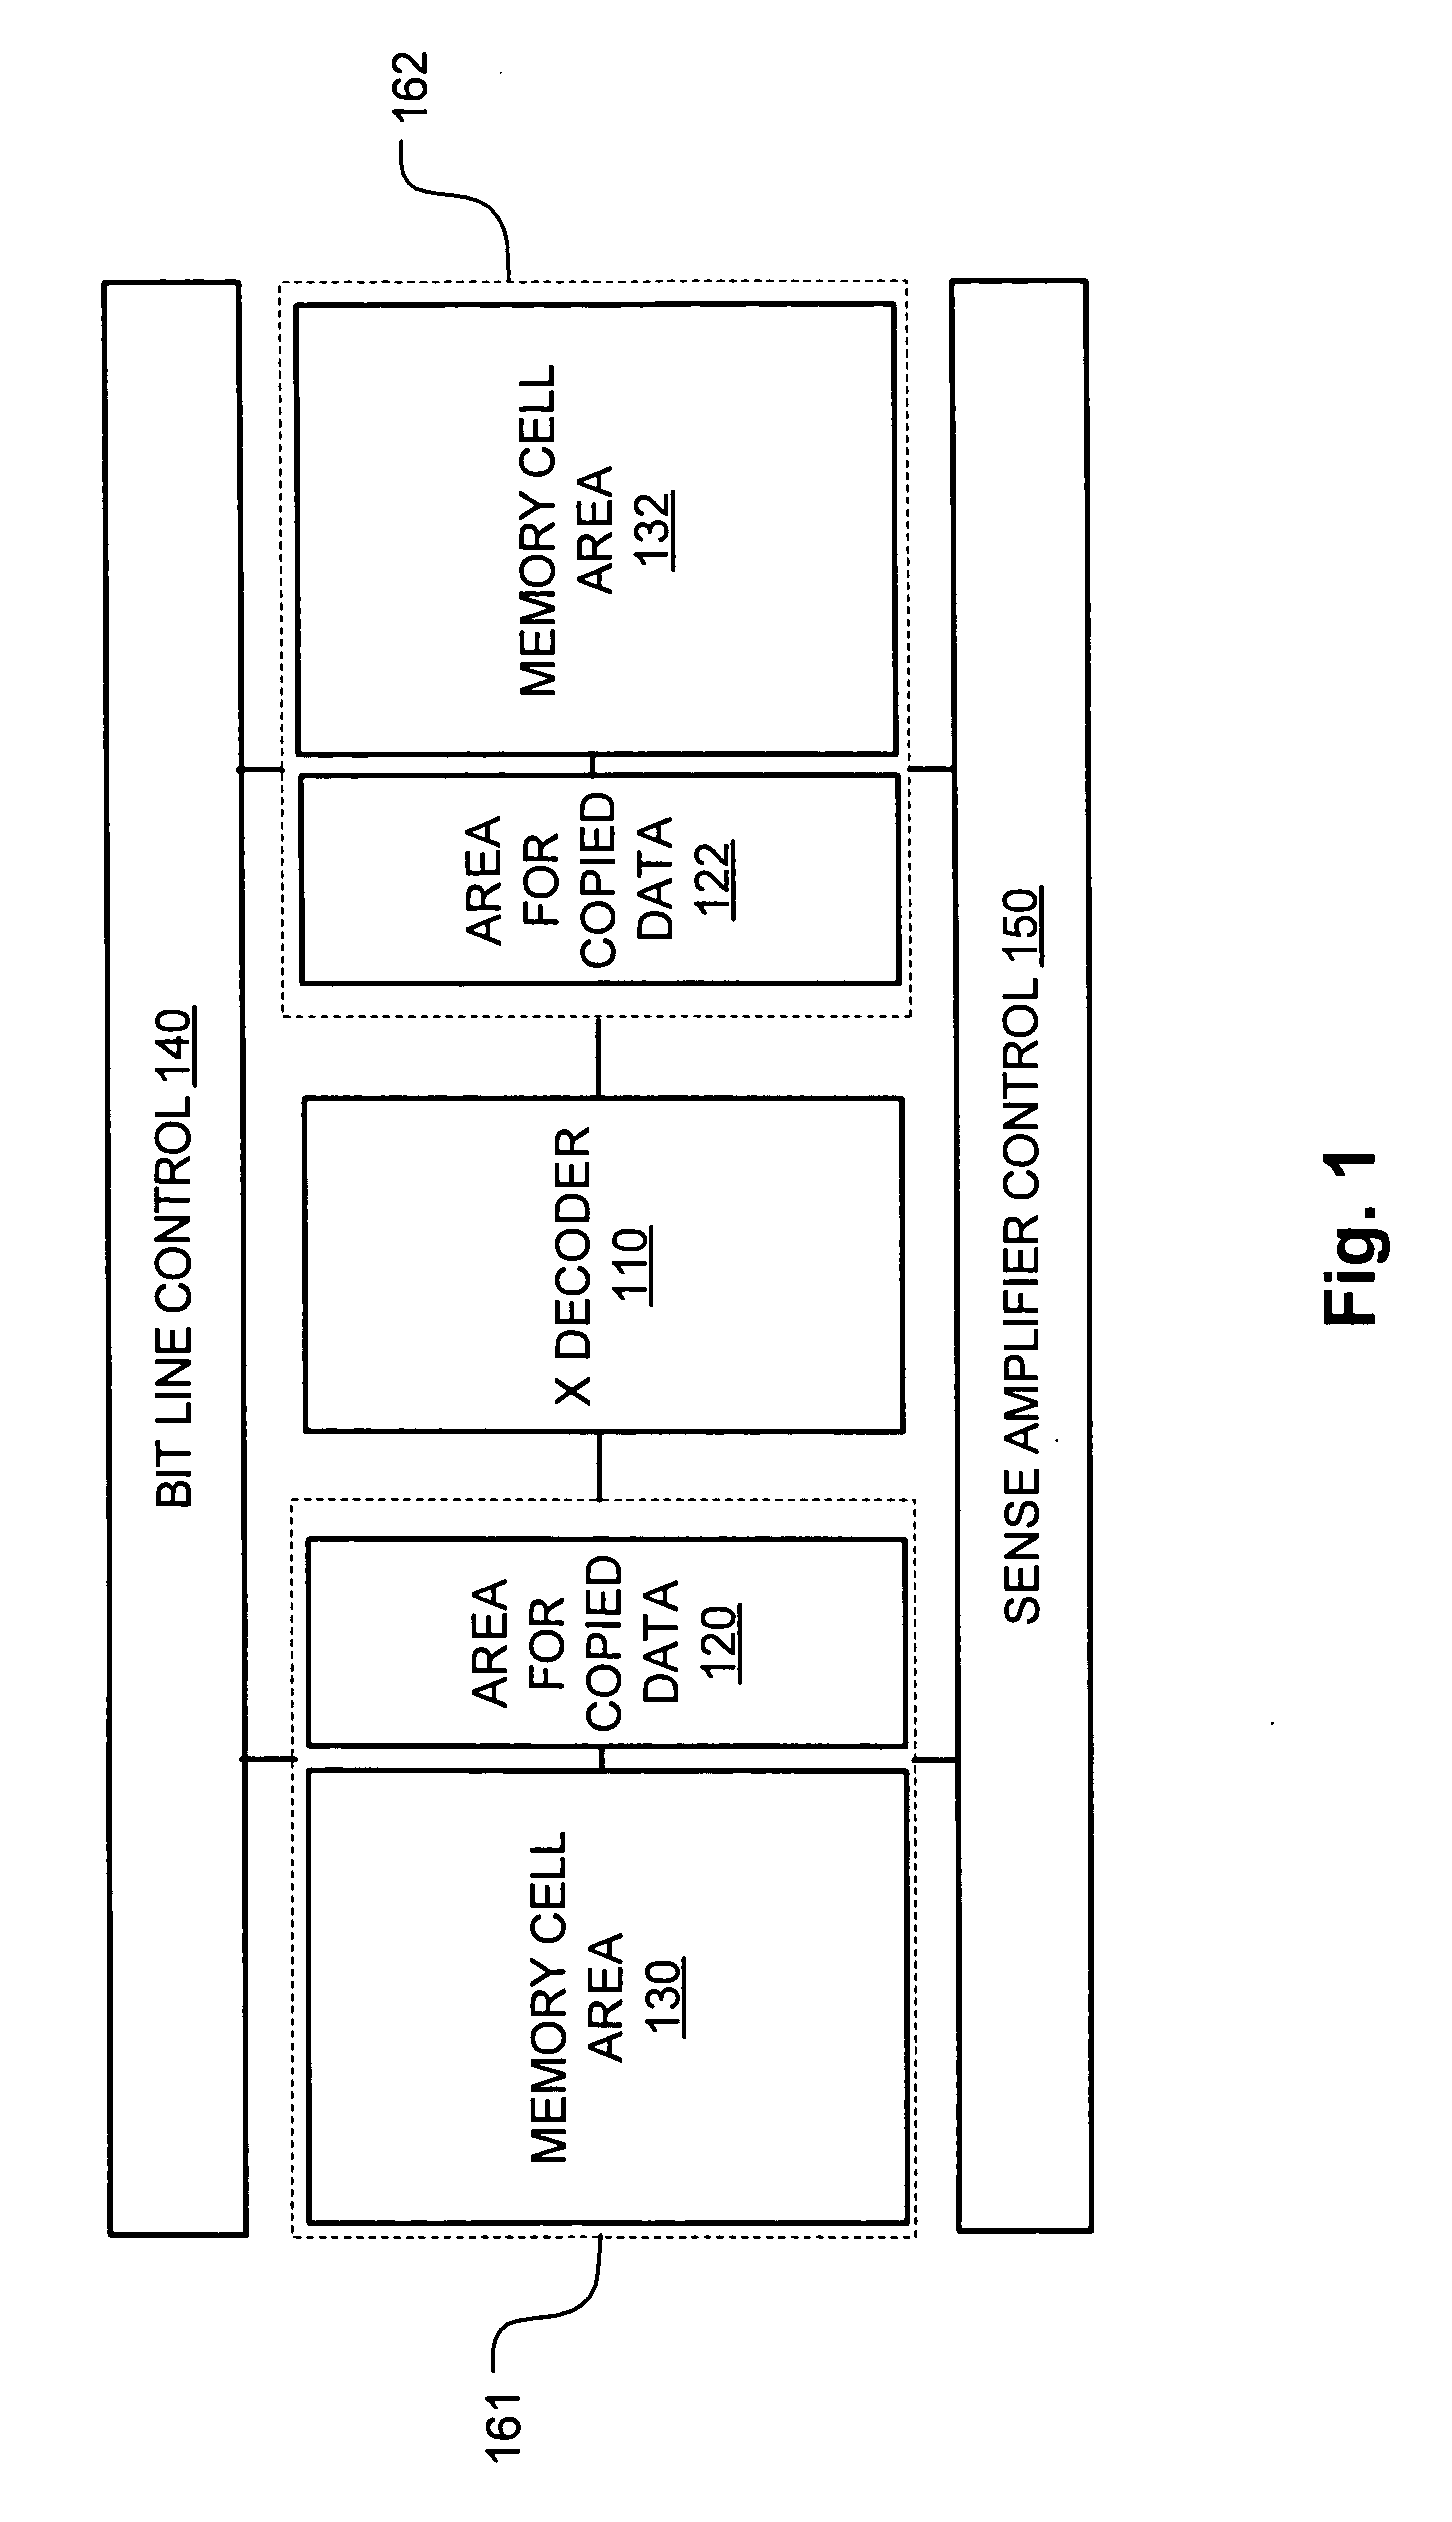 Method and apparatus for implementing high speed memory